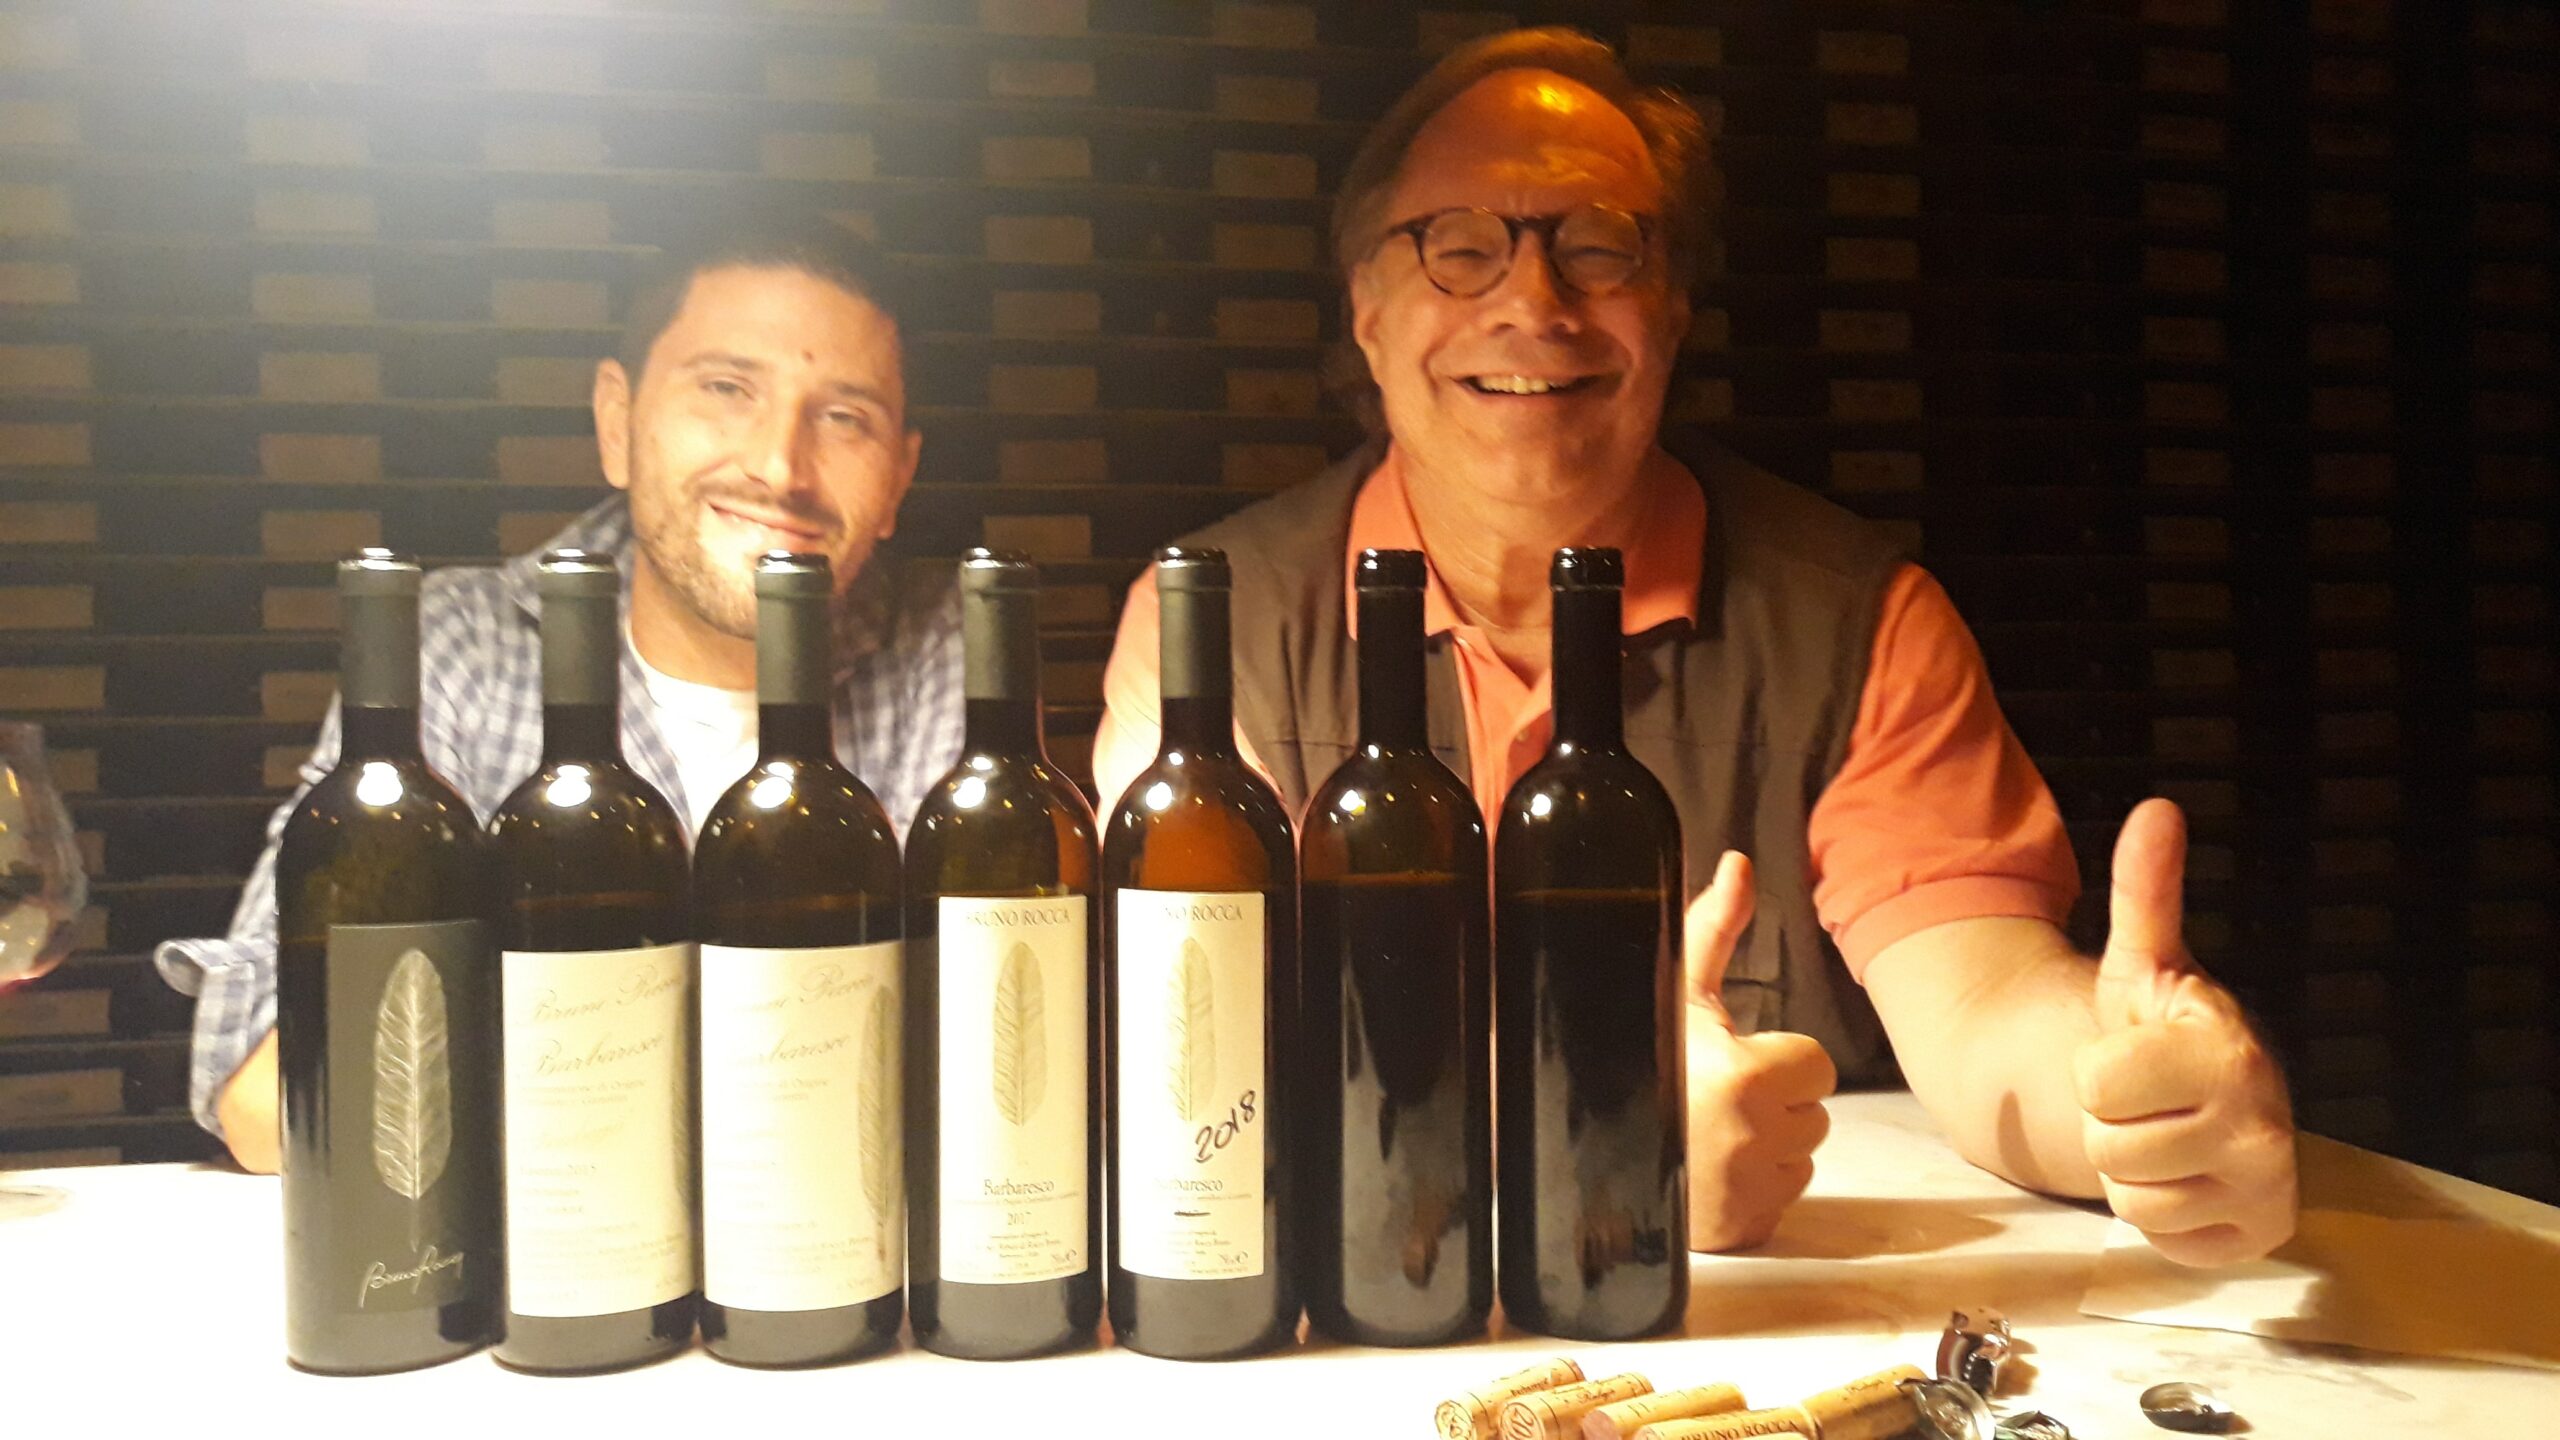 Tasting-at-Bruno-Rocca-revealed-many-great-wines-in-2020-and-one-the-Barbaresco-Riserva-Currà-that-was-one-of-the-years-best-min-scaled-1-2-1-1-1-1-1